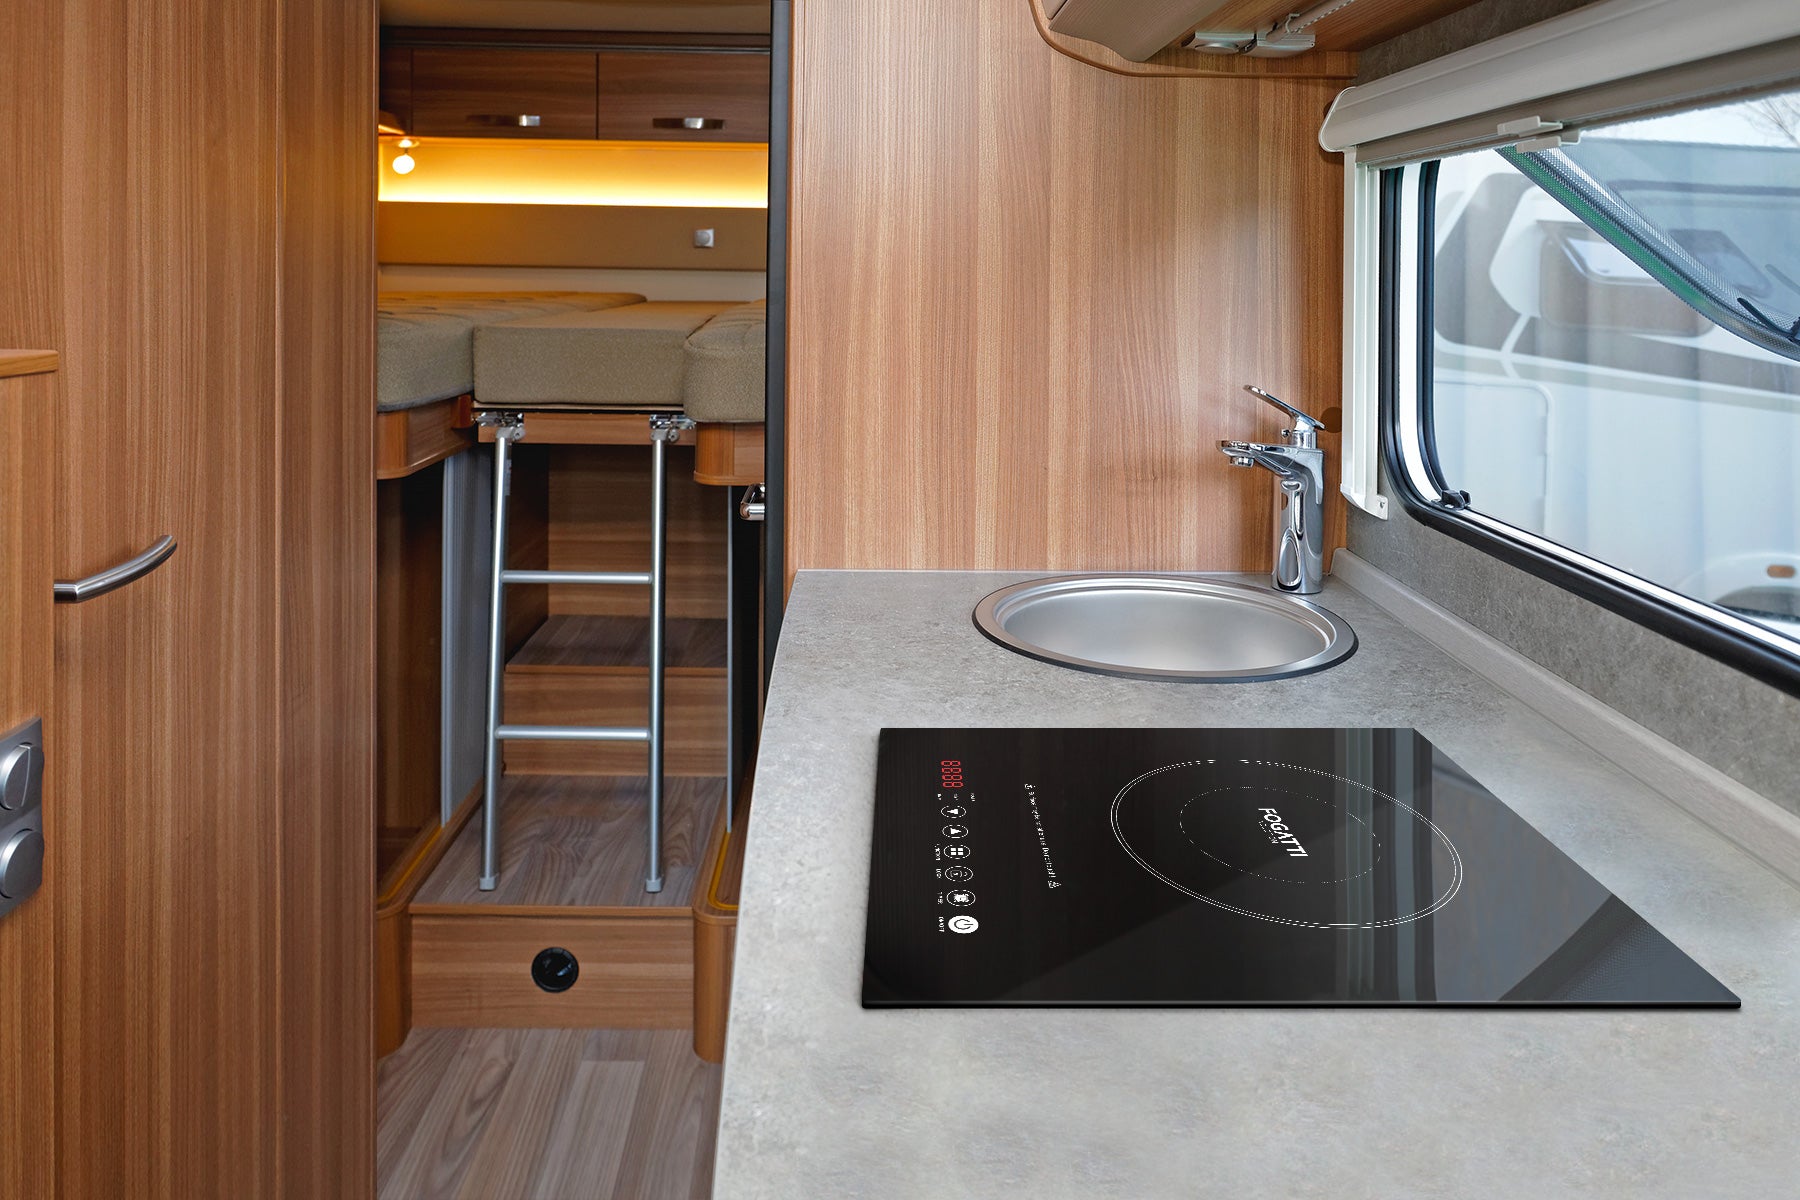 A Guide to RV Electric Induction Cooktop Burners: Types and Usage Tips